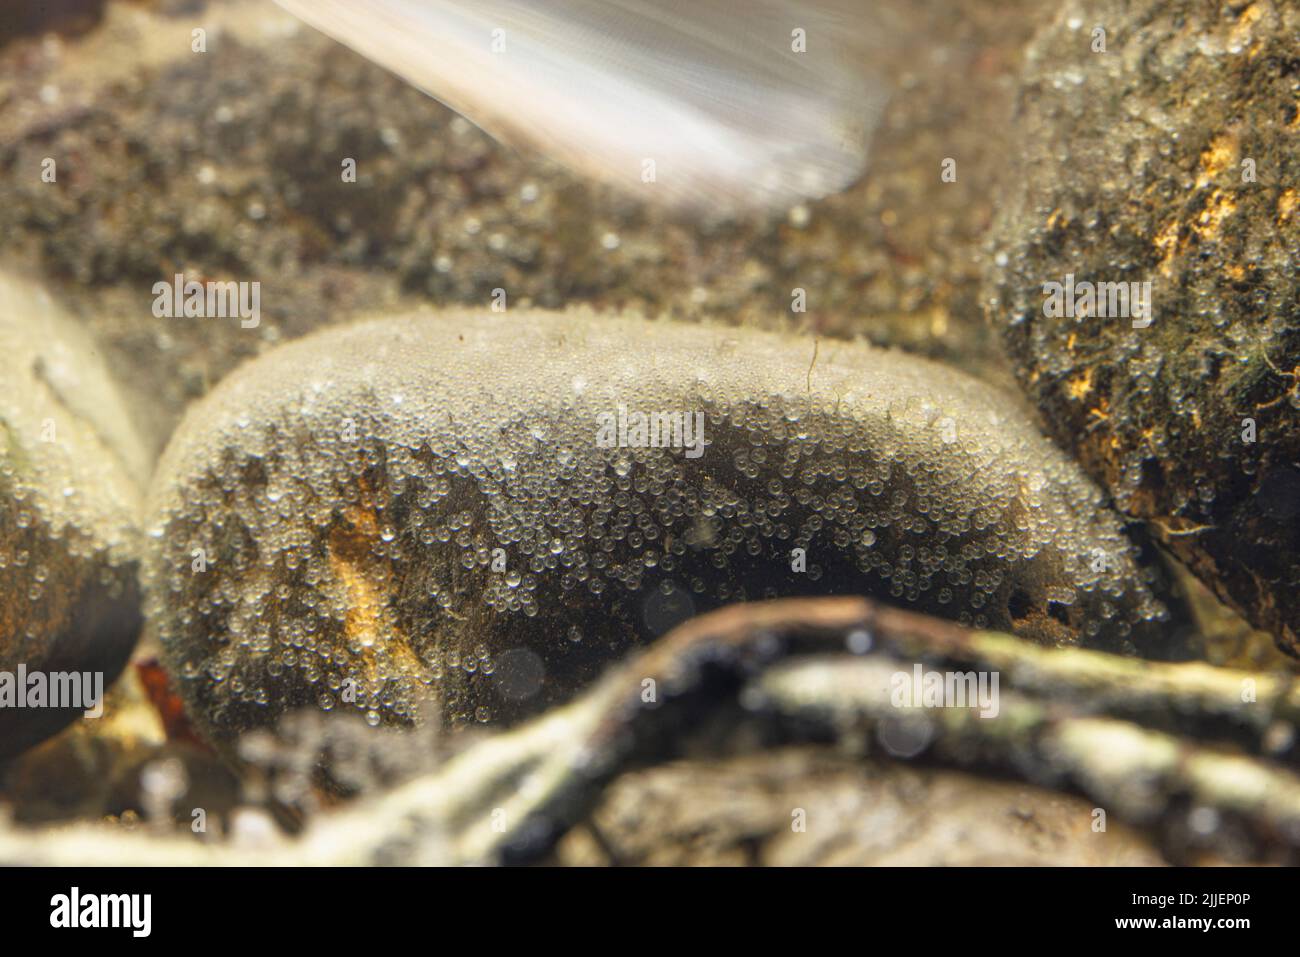 pike-perch, zander (Stizostedion lucioperca, Sander lucioperca), area-covering eggs on a large pebble, 5 days after oviposition, Germany Stock Photo